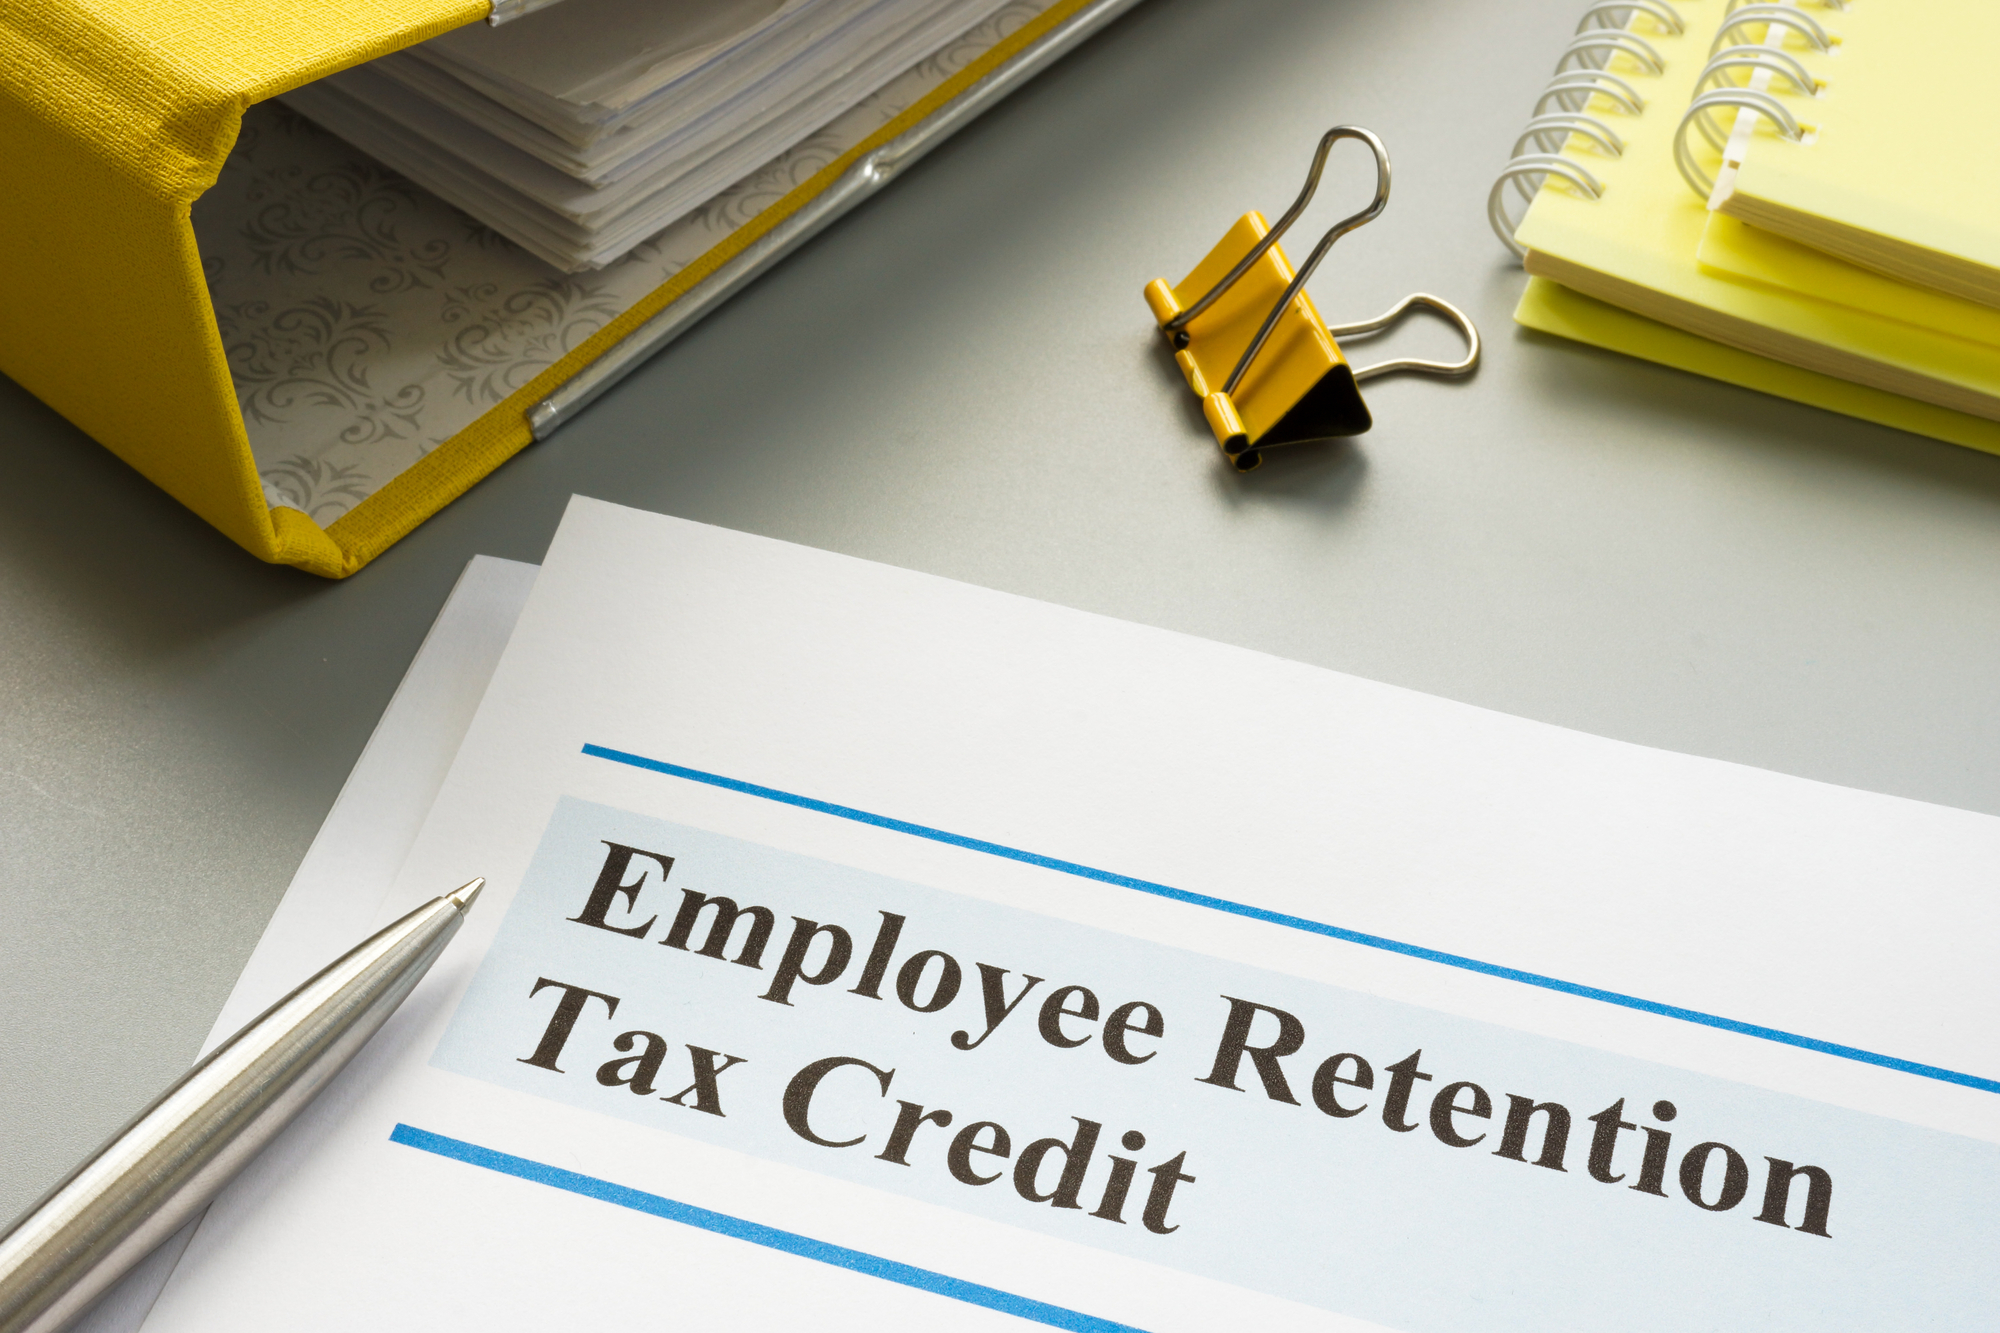 Employee Retention Credit Now: Where You Stand and What You Can Do